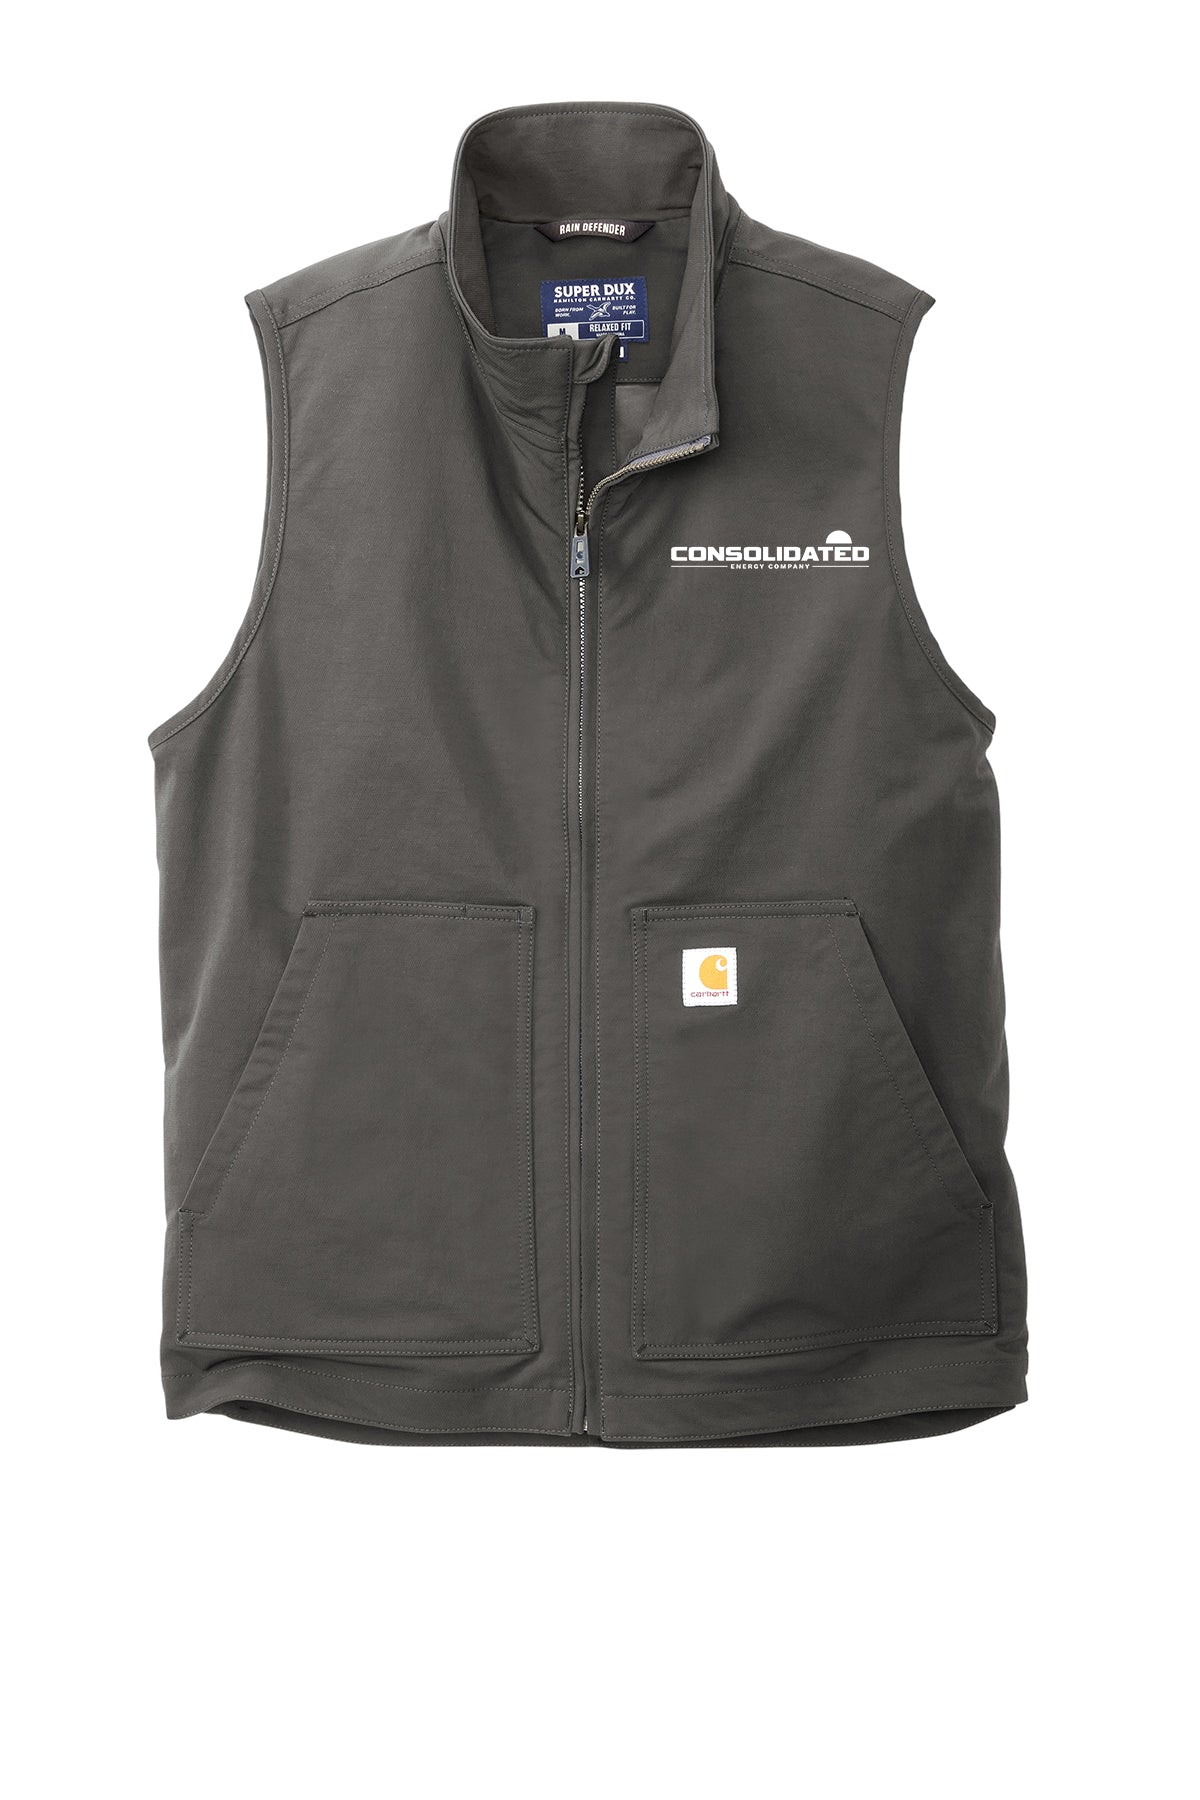 Consolidated Energy Carhartt Soft Shell Vest